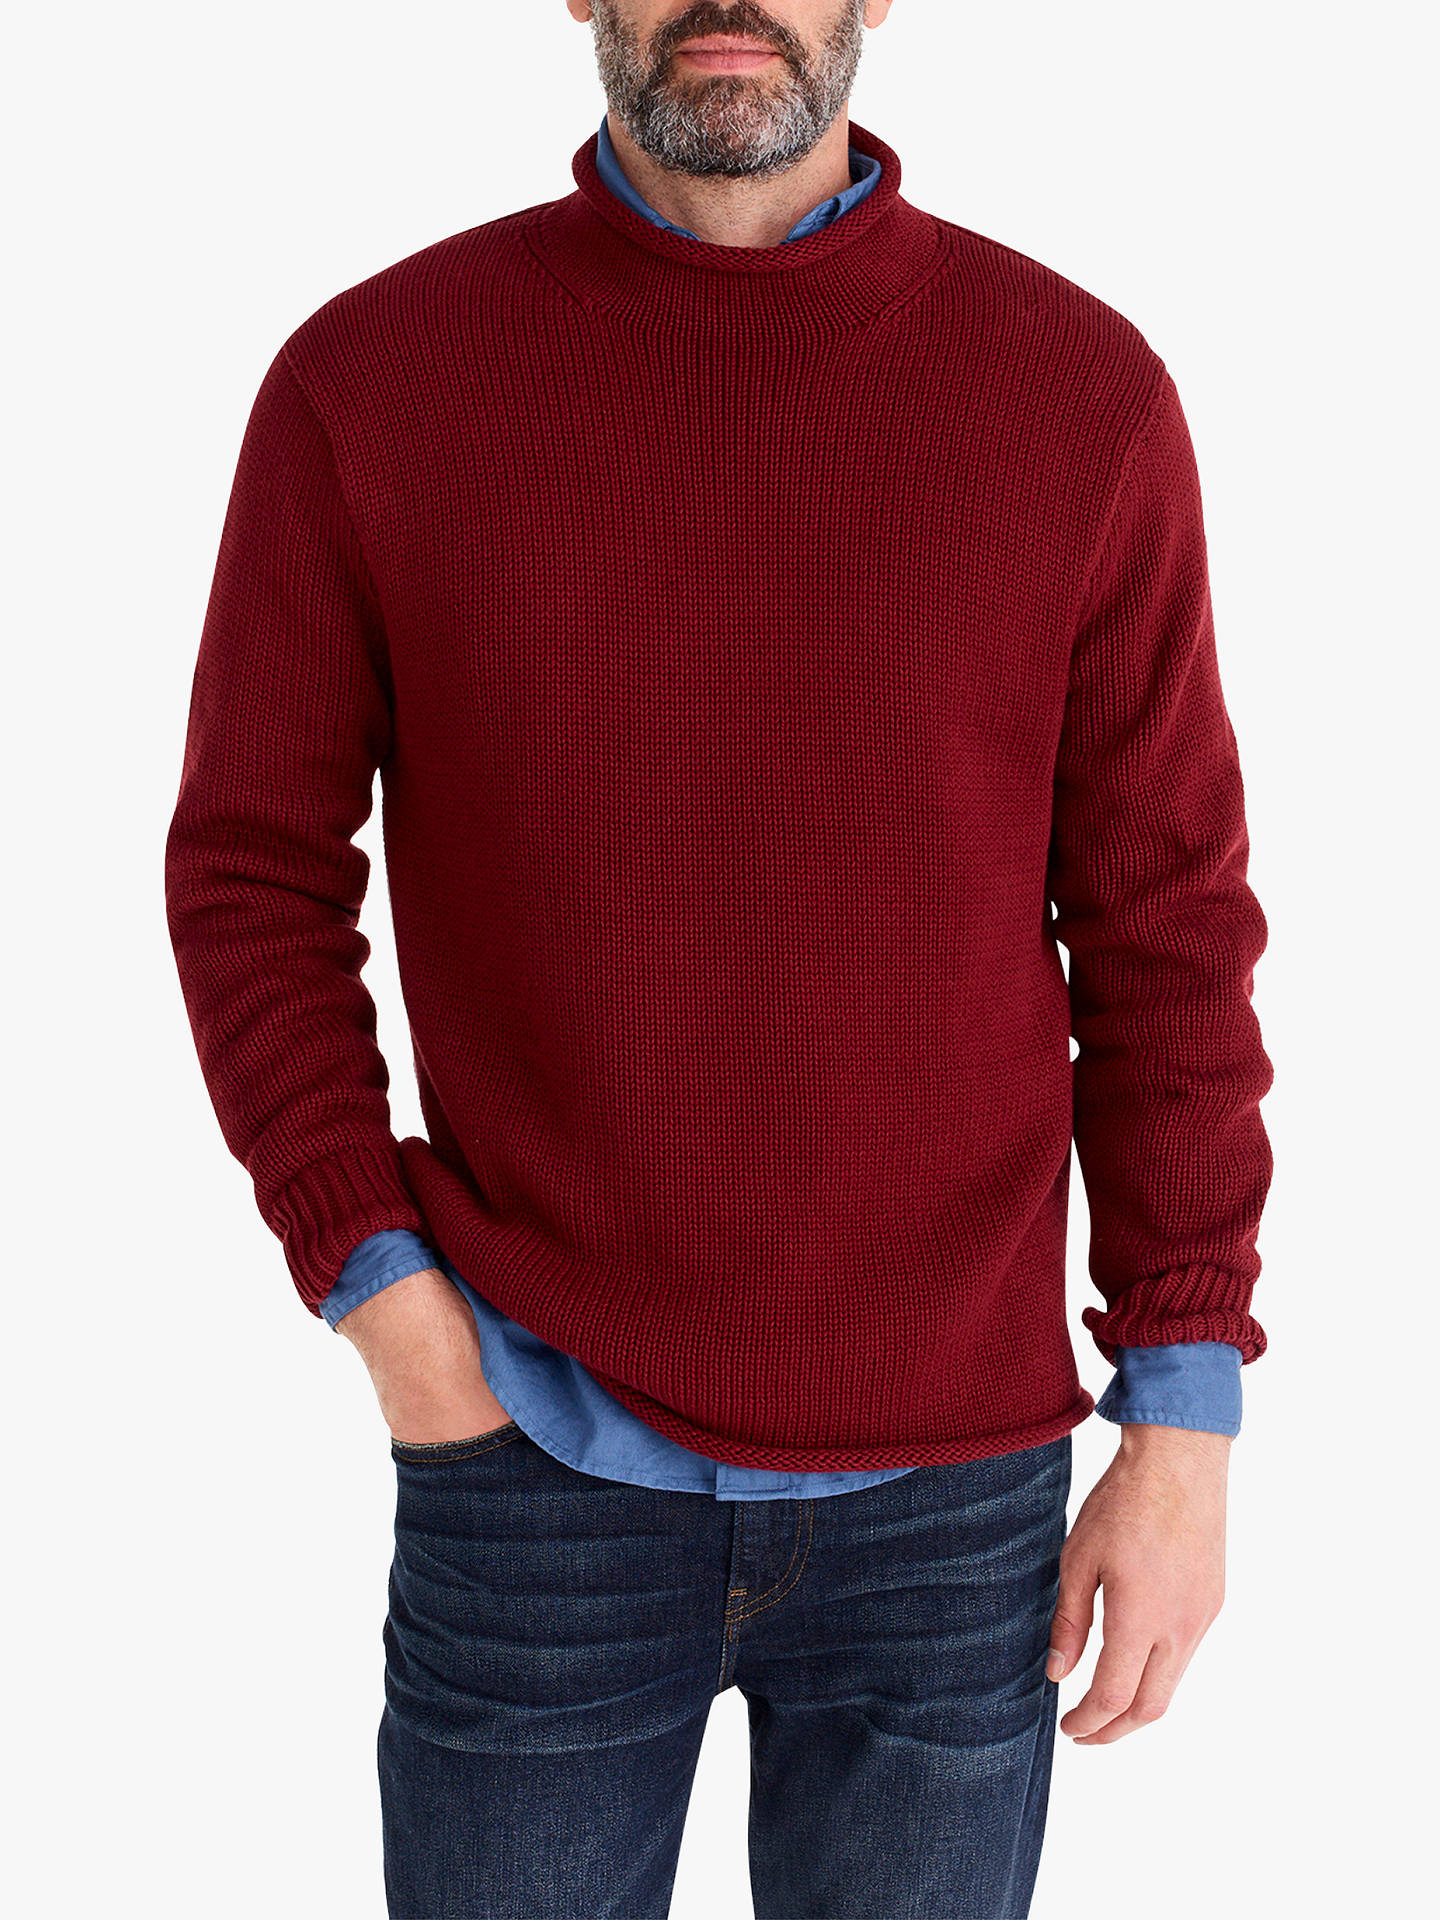 J.Crew Cotton Solid Roll Neck Jumper at John Lewis & Partners